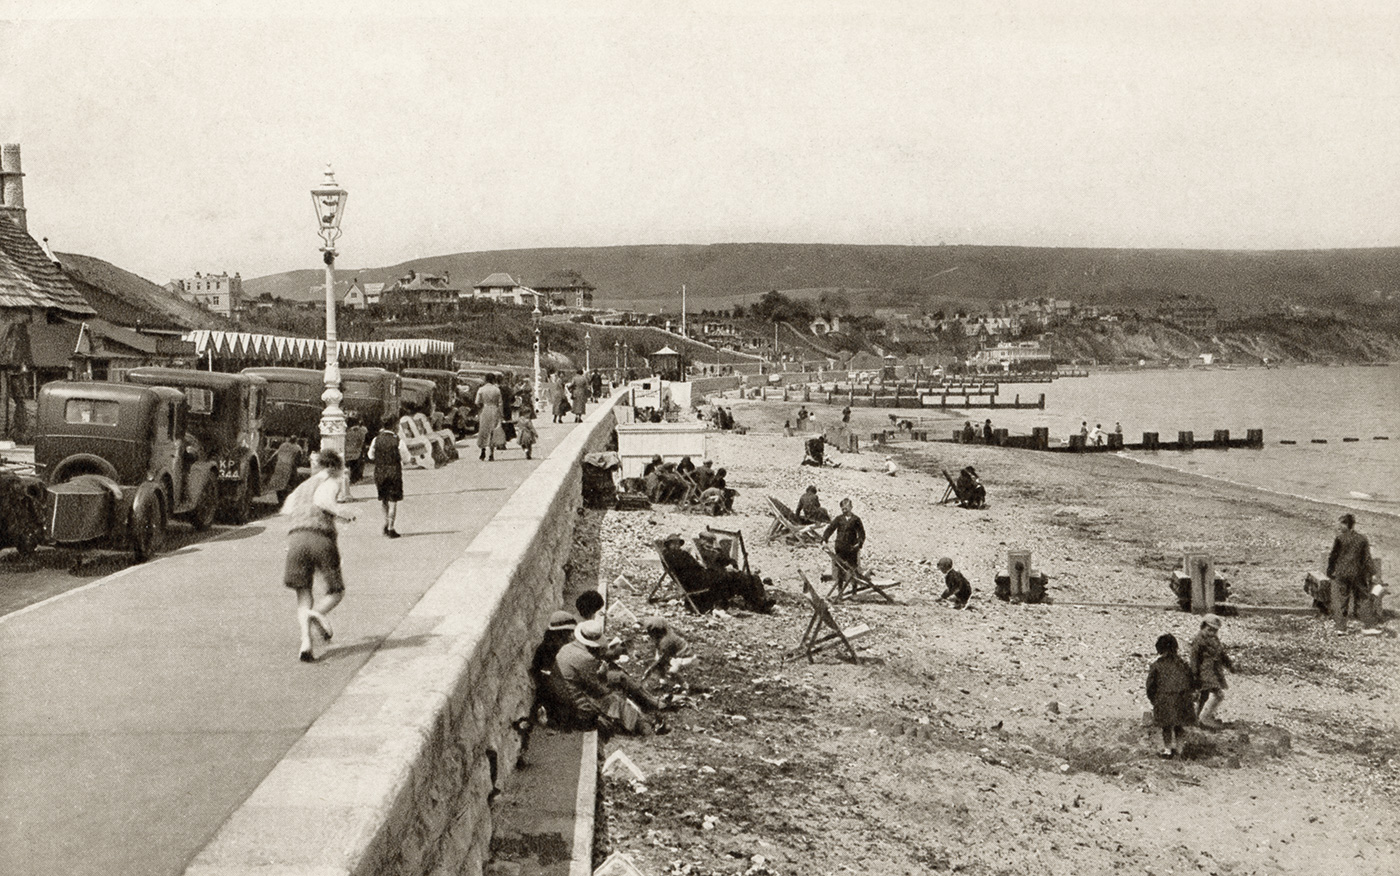 Shore Road and the beach in the 1930s